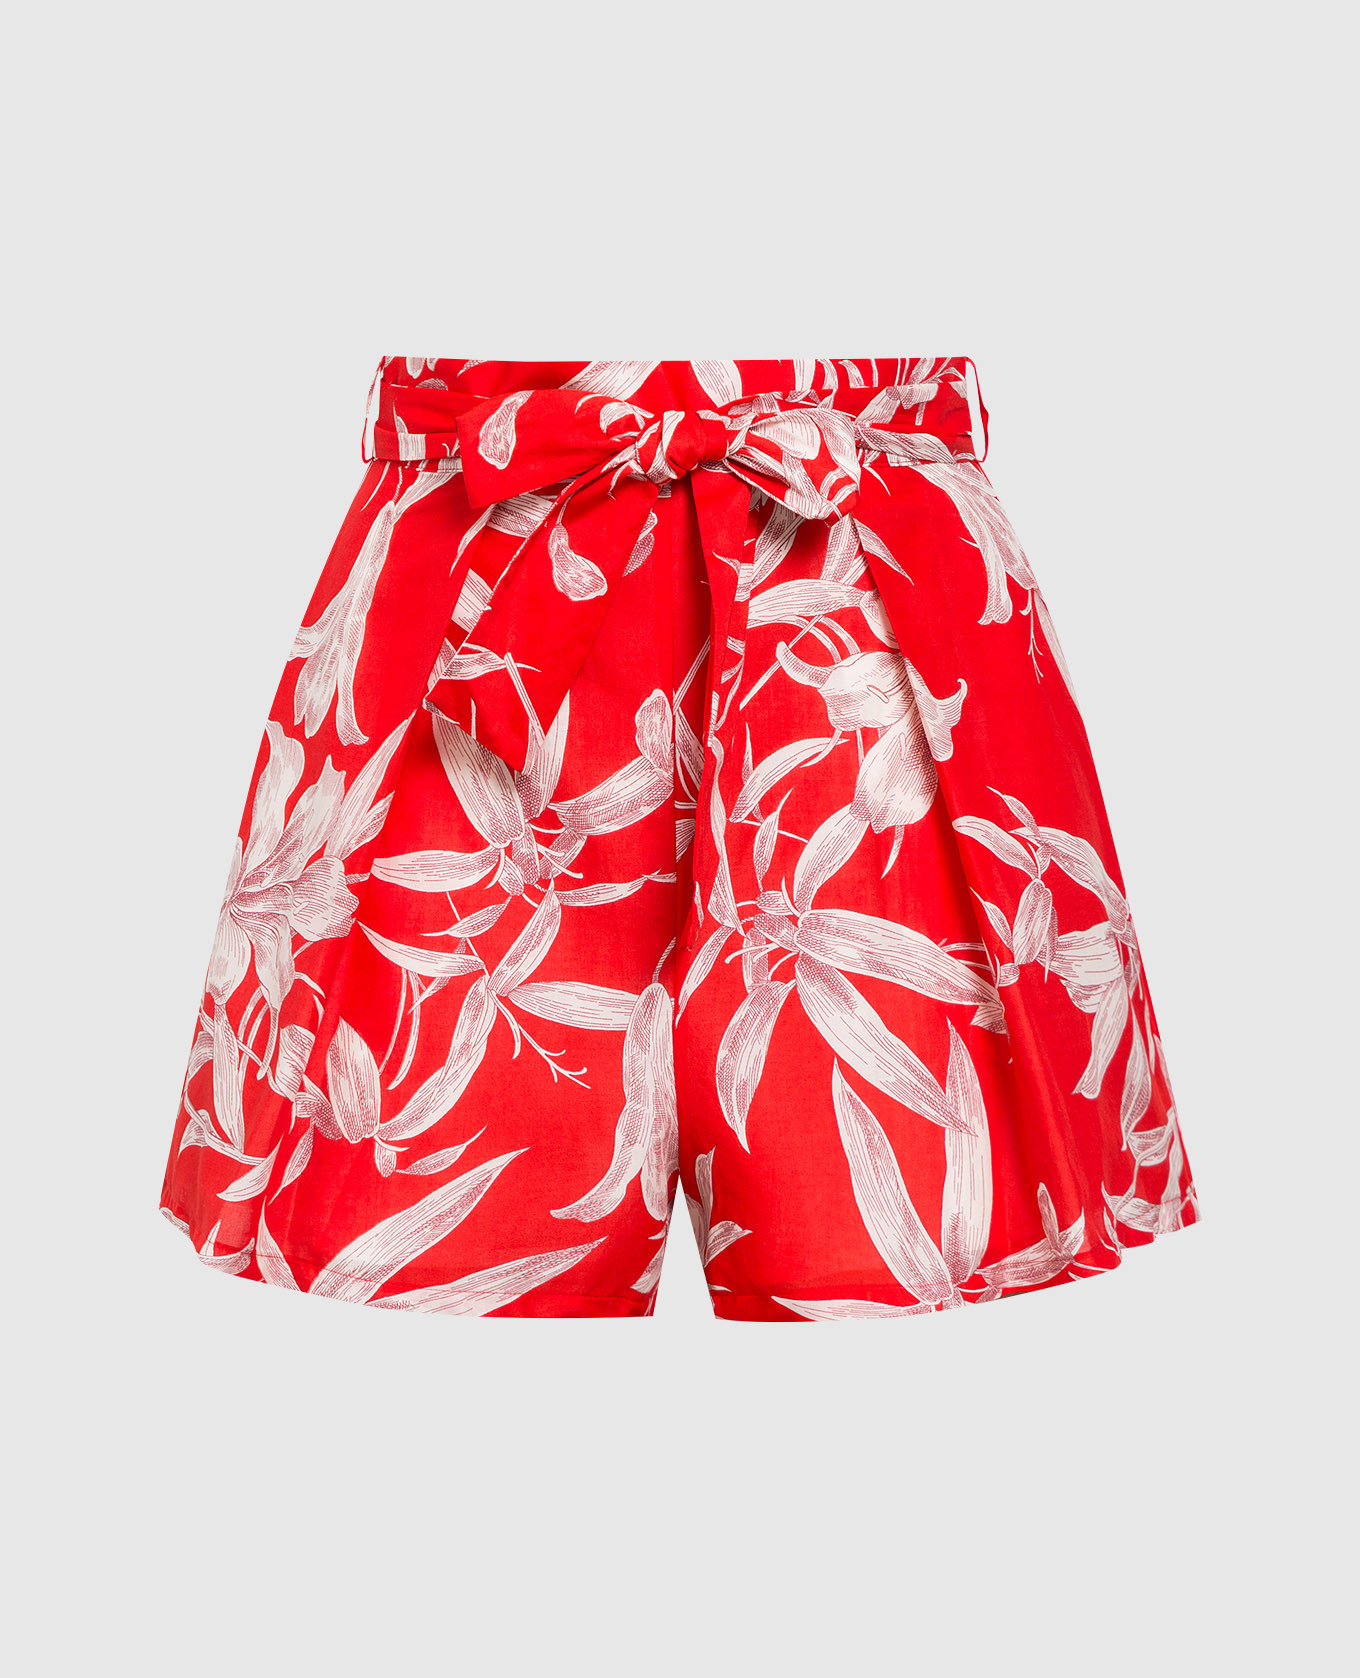 Red shorts in floral print